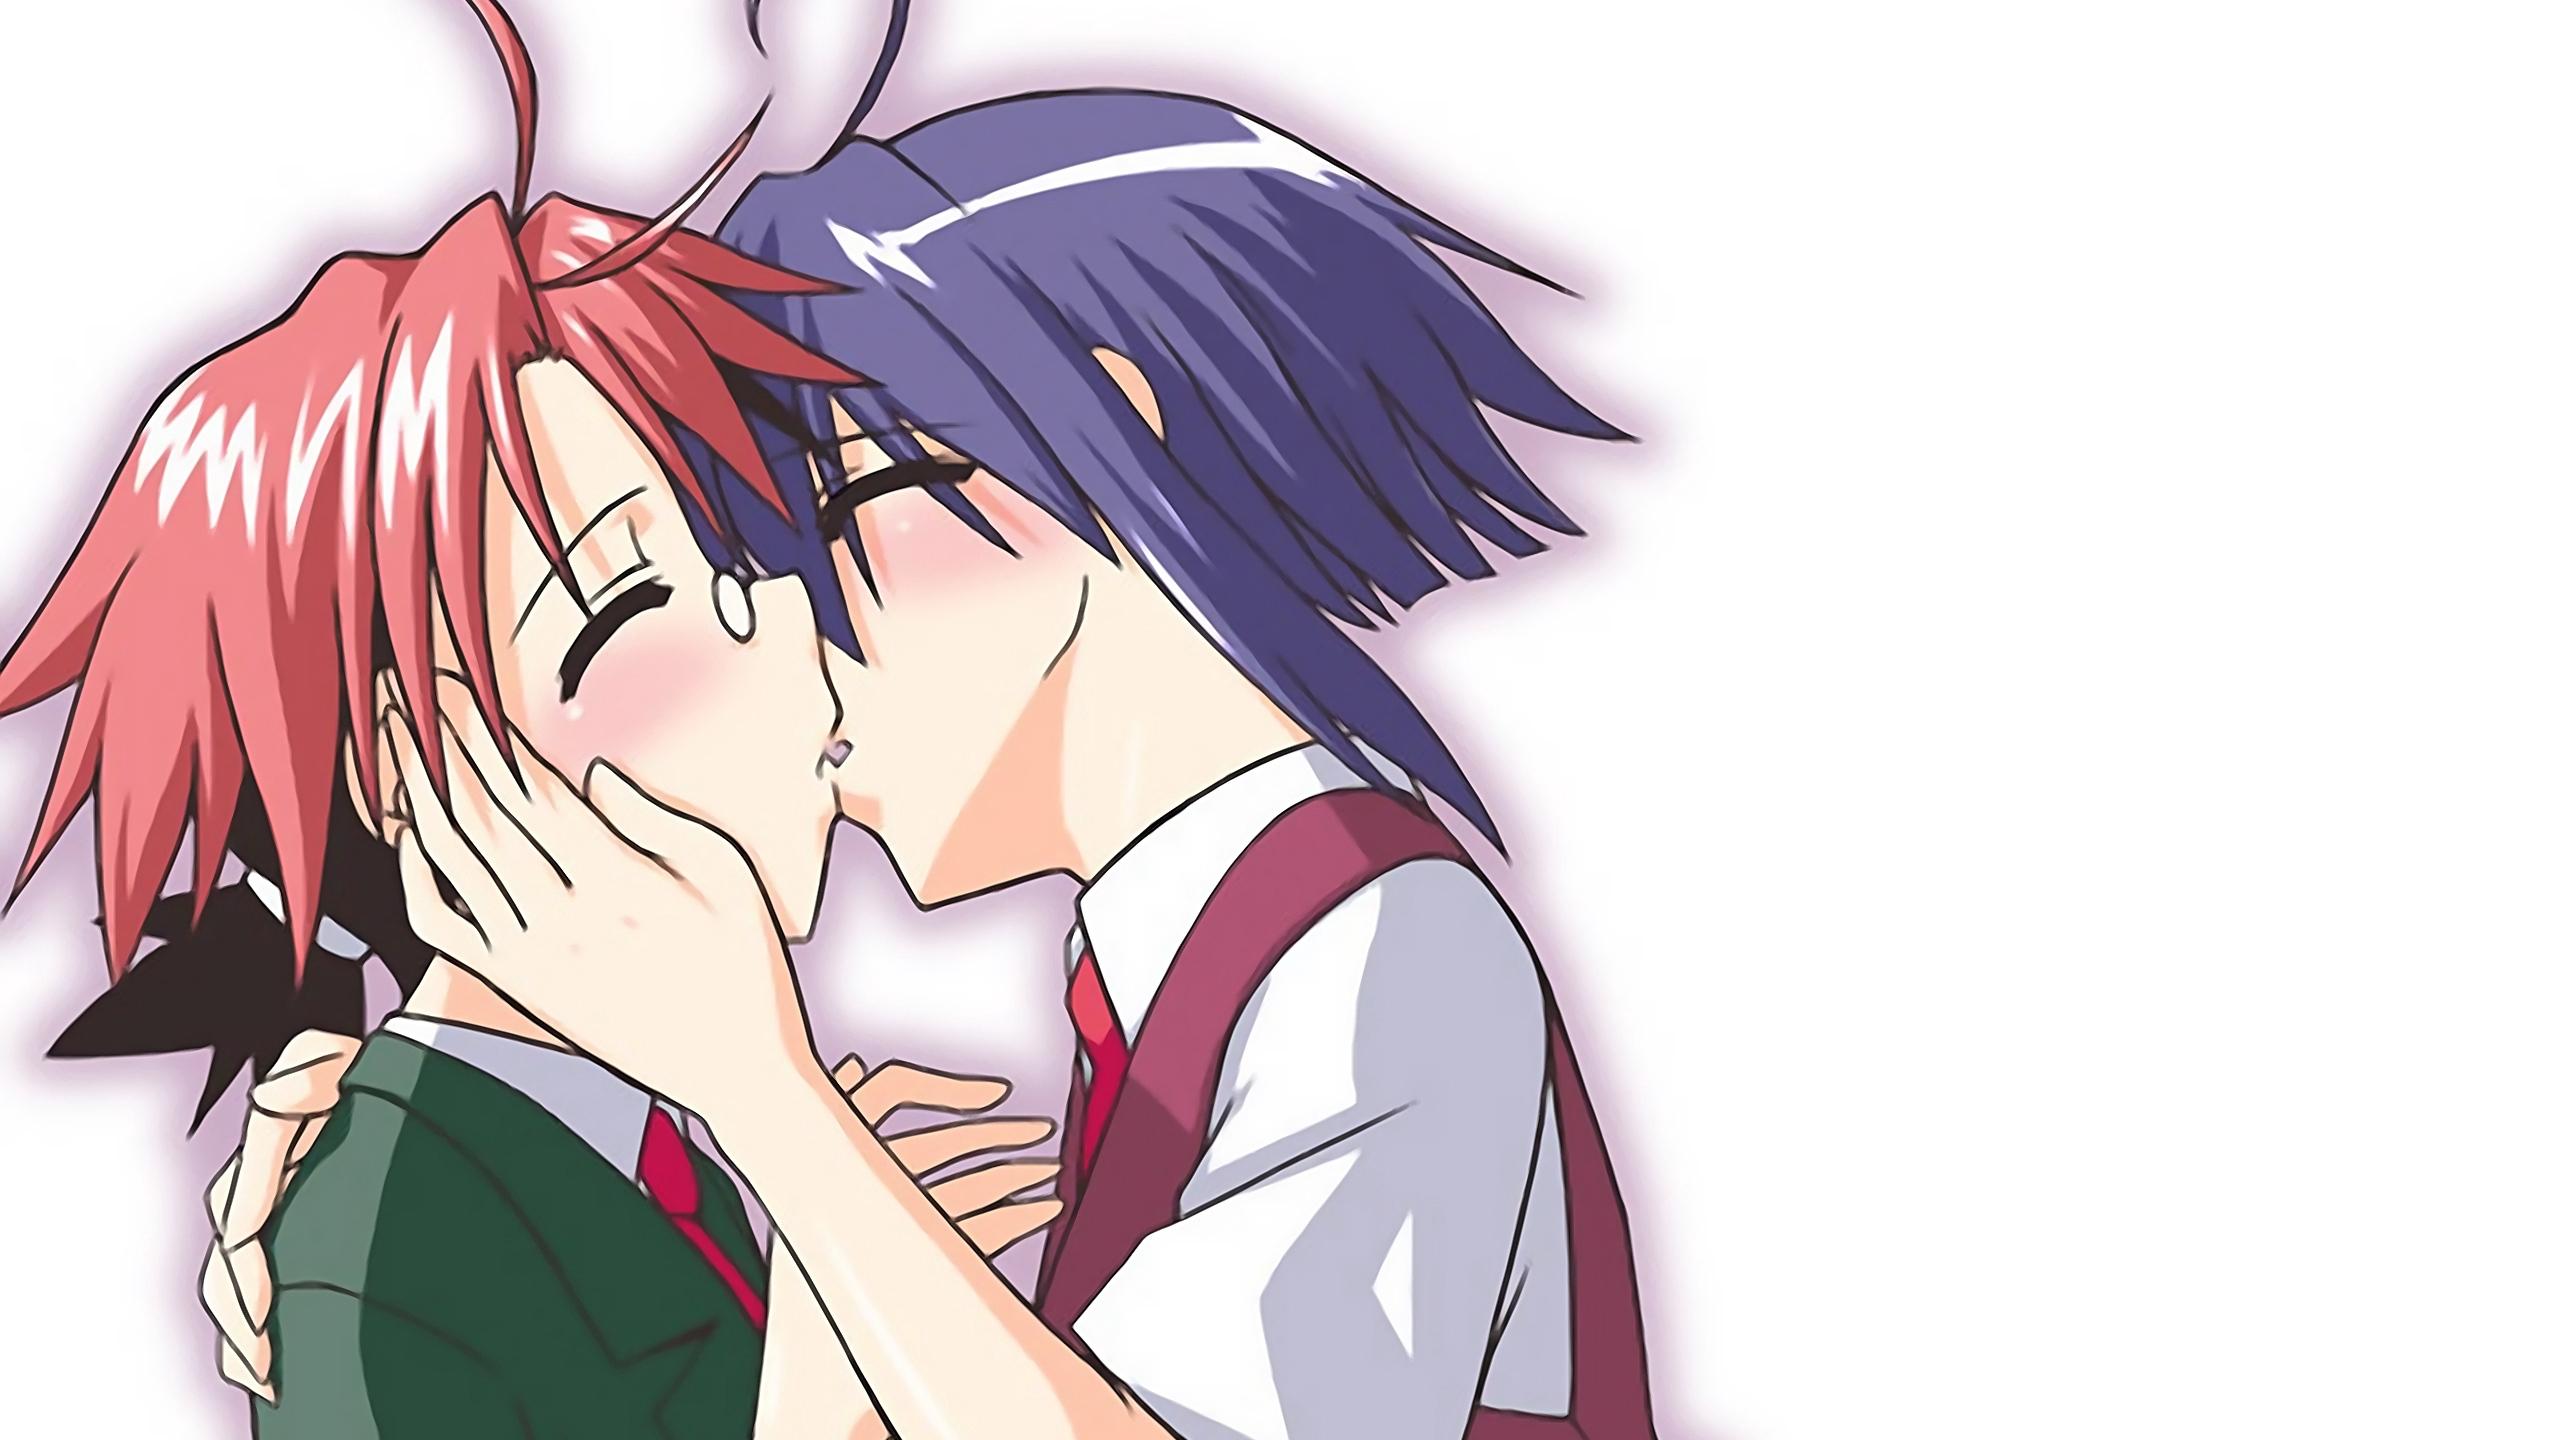 Anime Boy And Girl Kissing Wallpapers - Wallpaper Cave